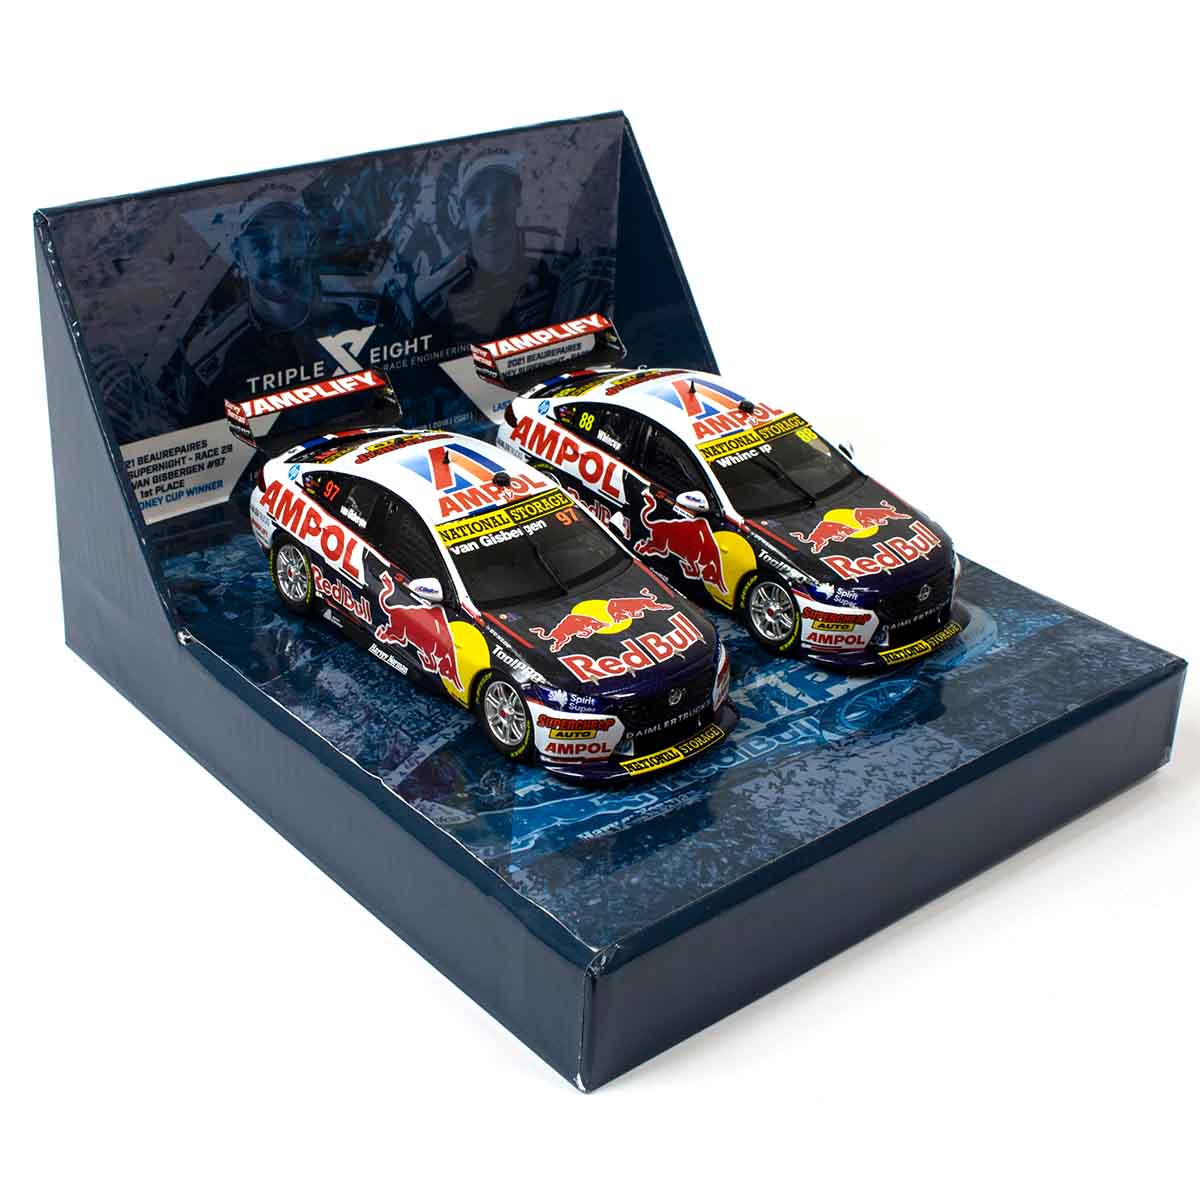 HOLDEN ZB COMMODORE - RED BULL AMPOL RACING - VAN GISBERGEN/WHINCUP - 2021 TEAMS CHAMPIONSHIP WINNER TWIN SET - 1:43 Scale Diecast Model Car